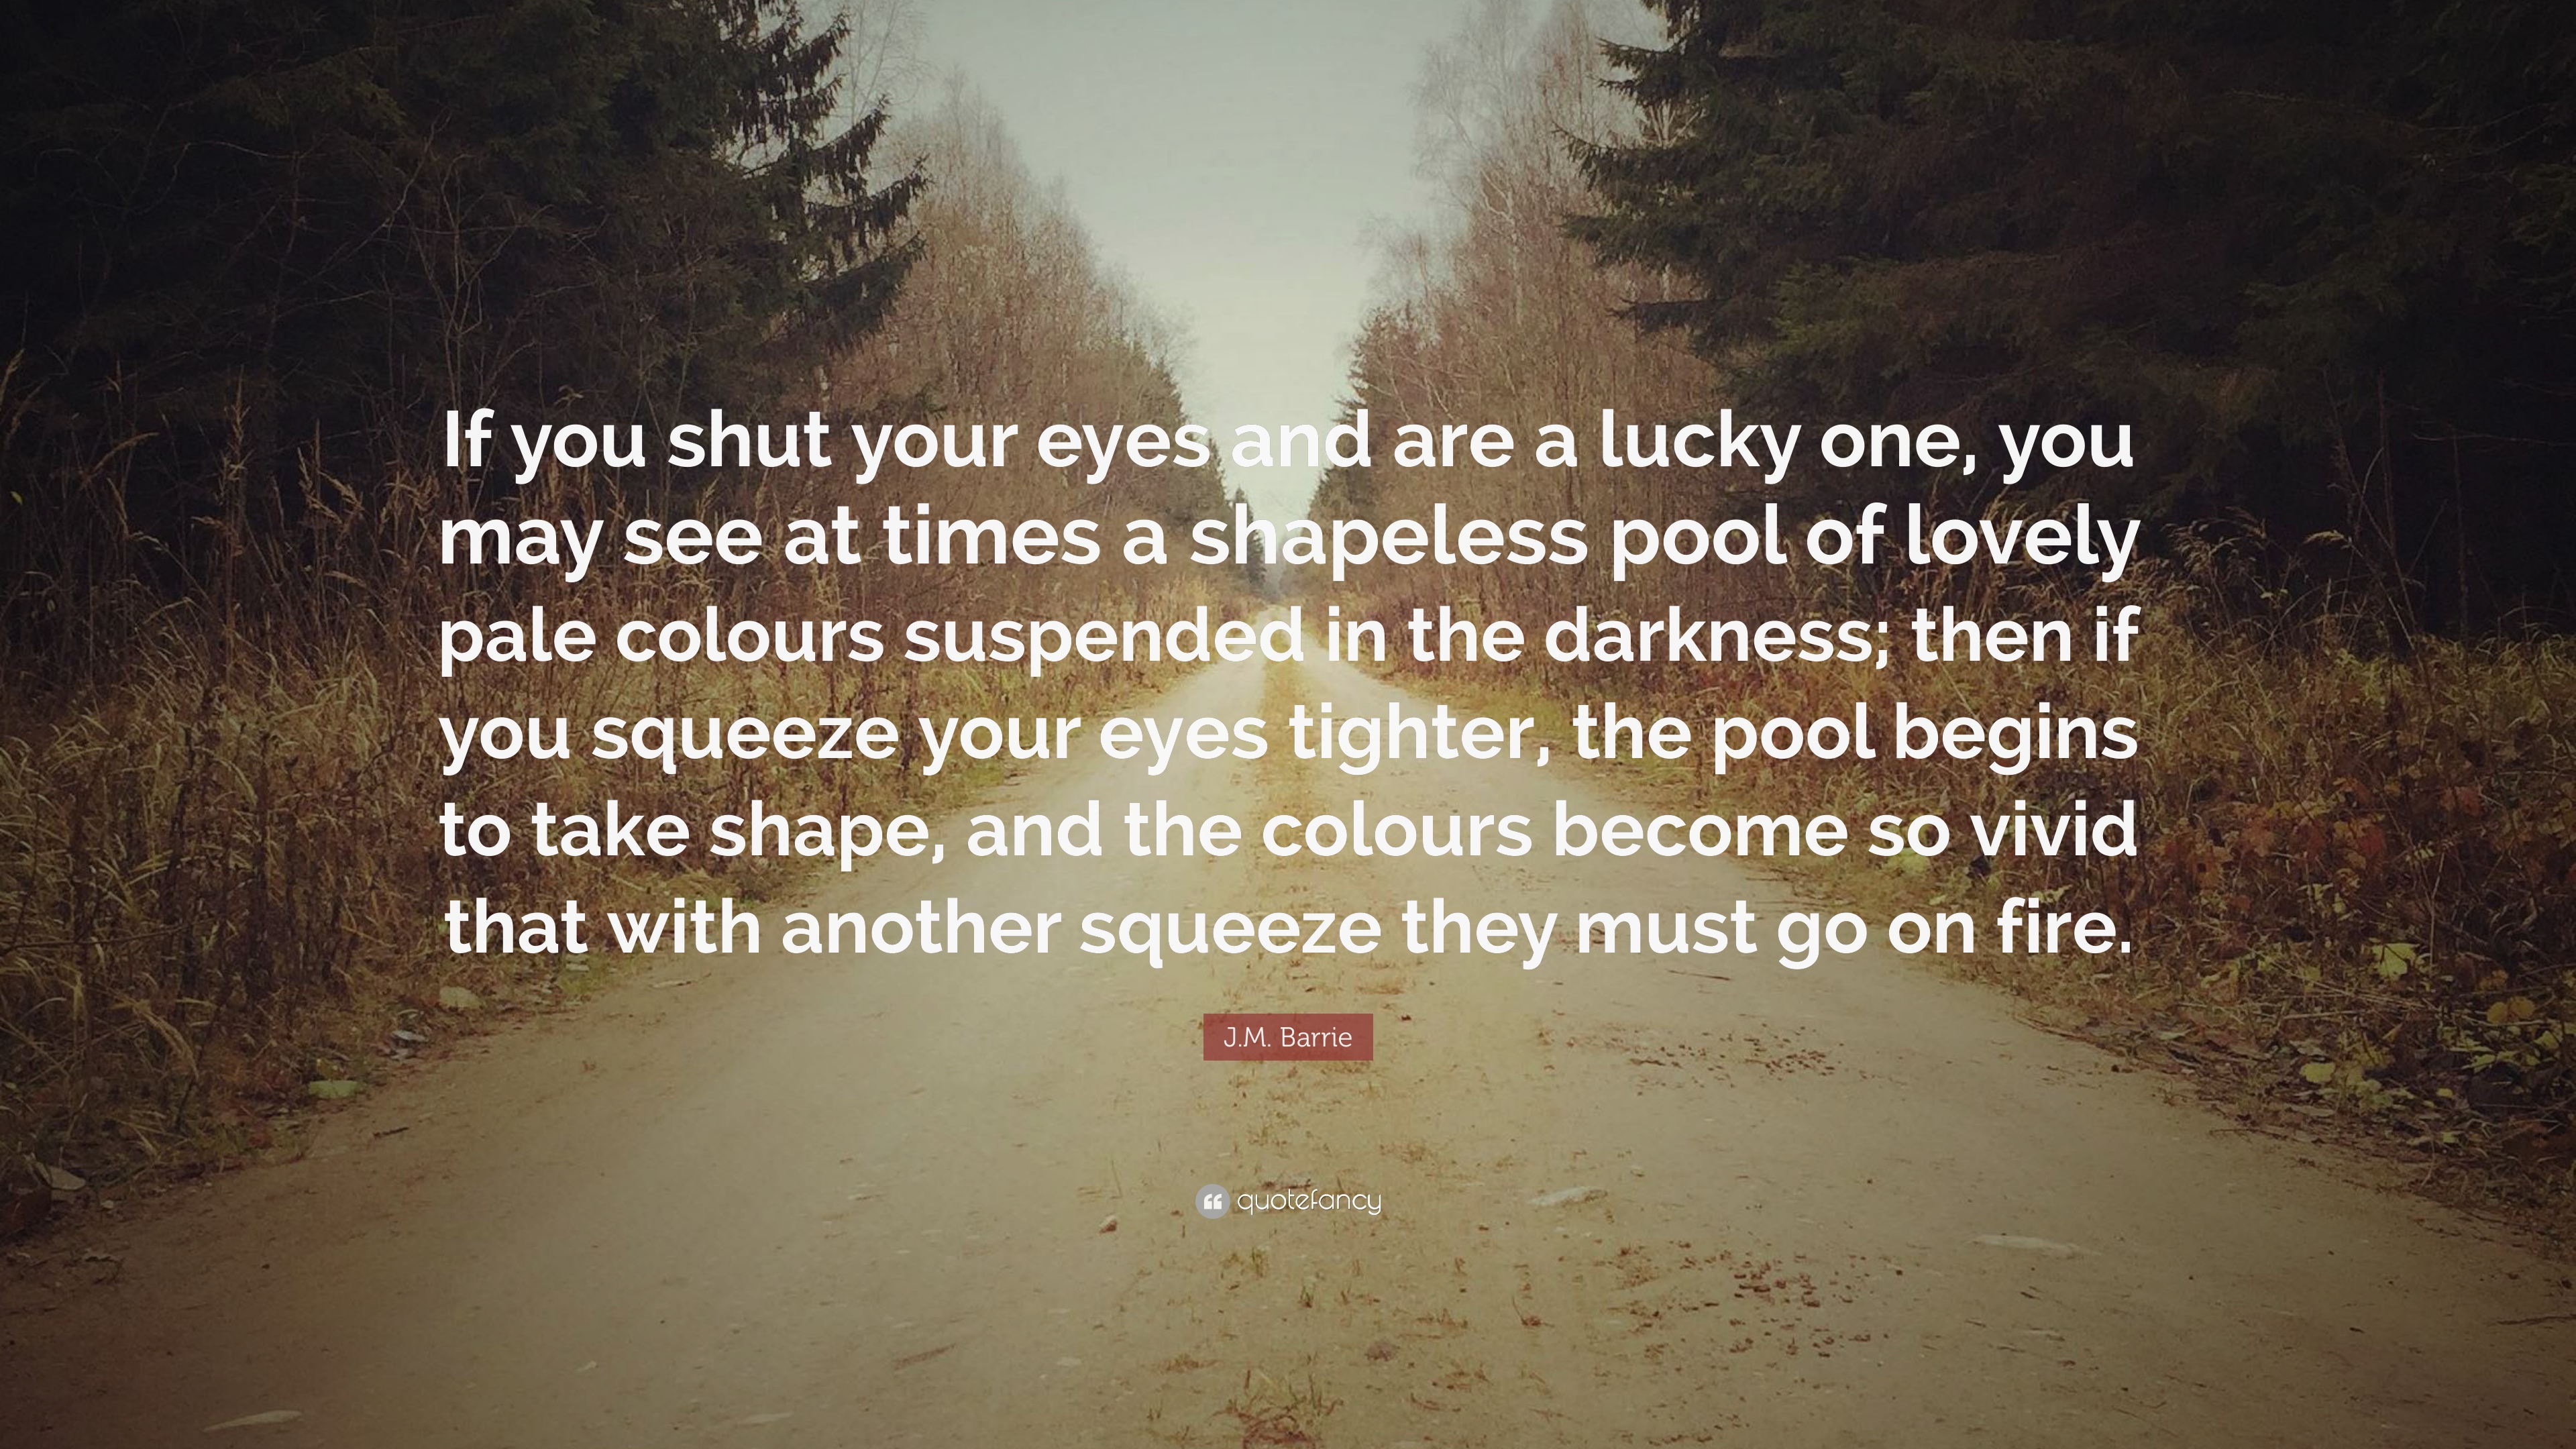 J.M. Barrie Quote: “If you shut your eyes and are a lucky one, you may see at times a shapeless pool of lovely pale colours suspended in the...”